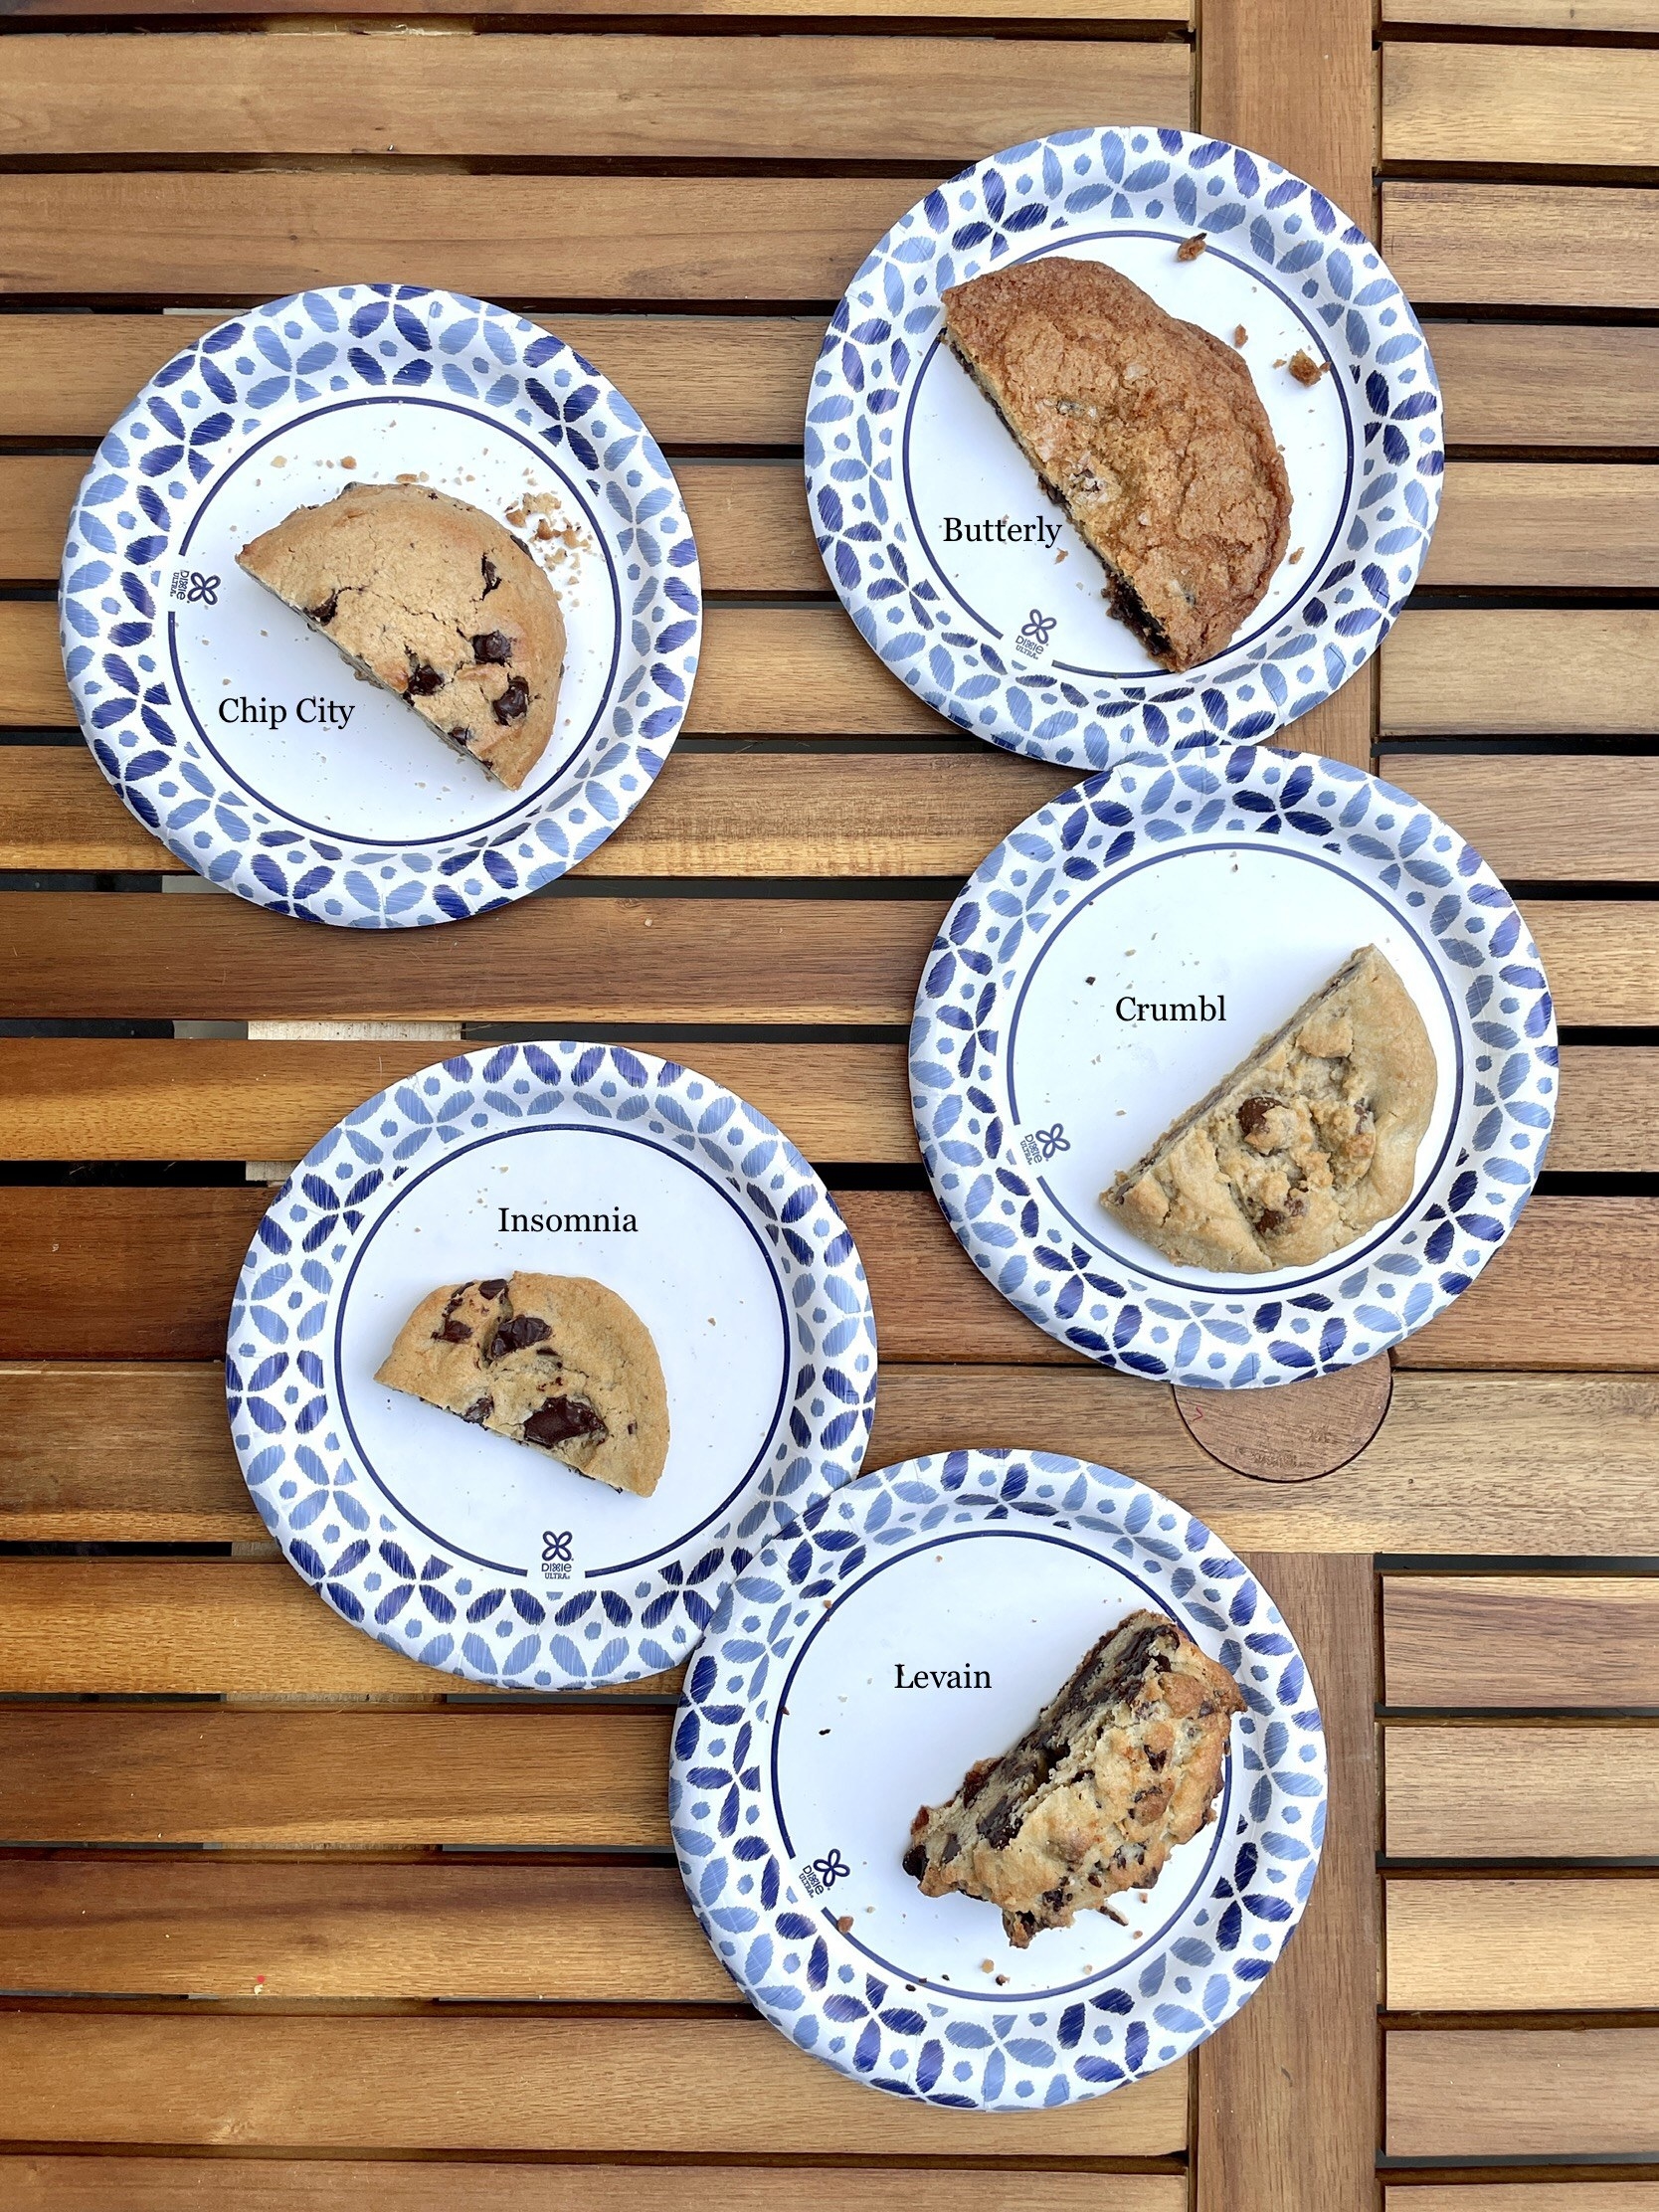 Five paper plates with five cookie halves are arranged on a table. Each cookie has visible chocolate chips